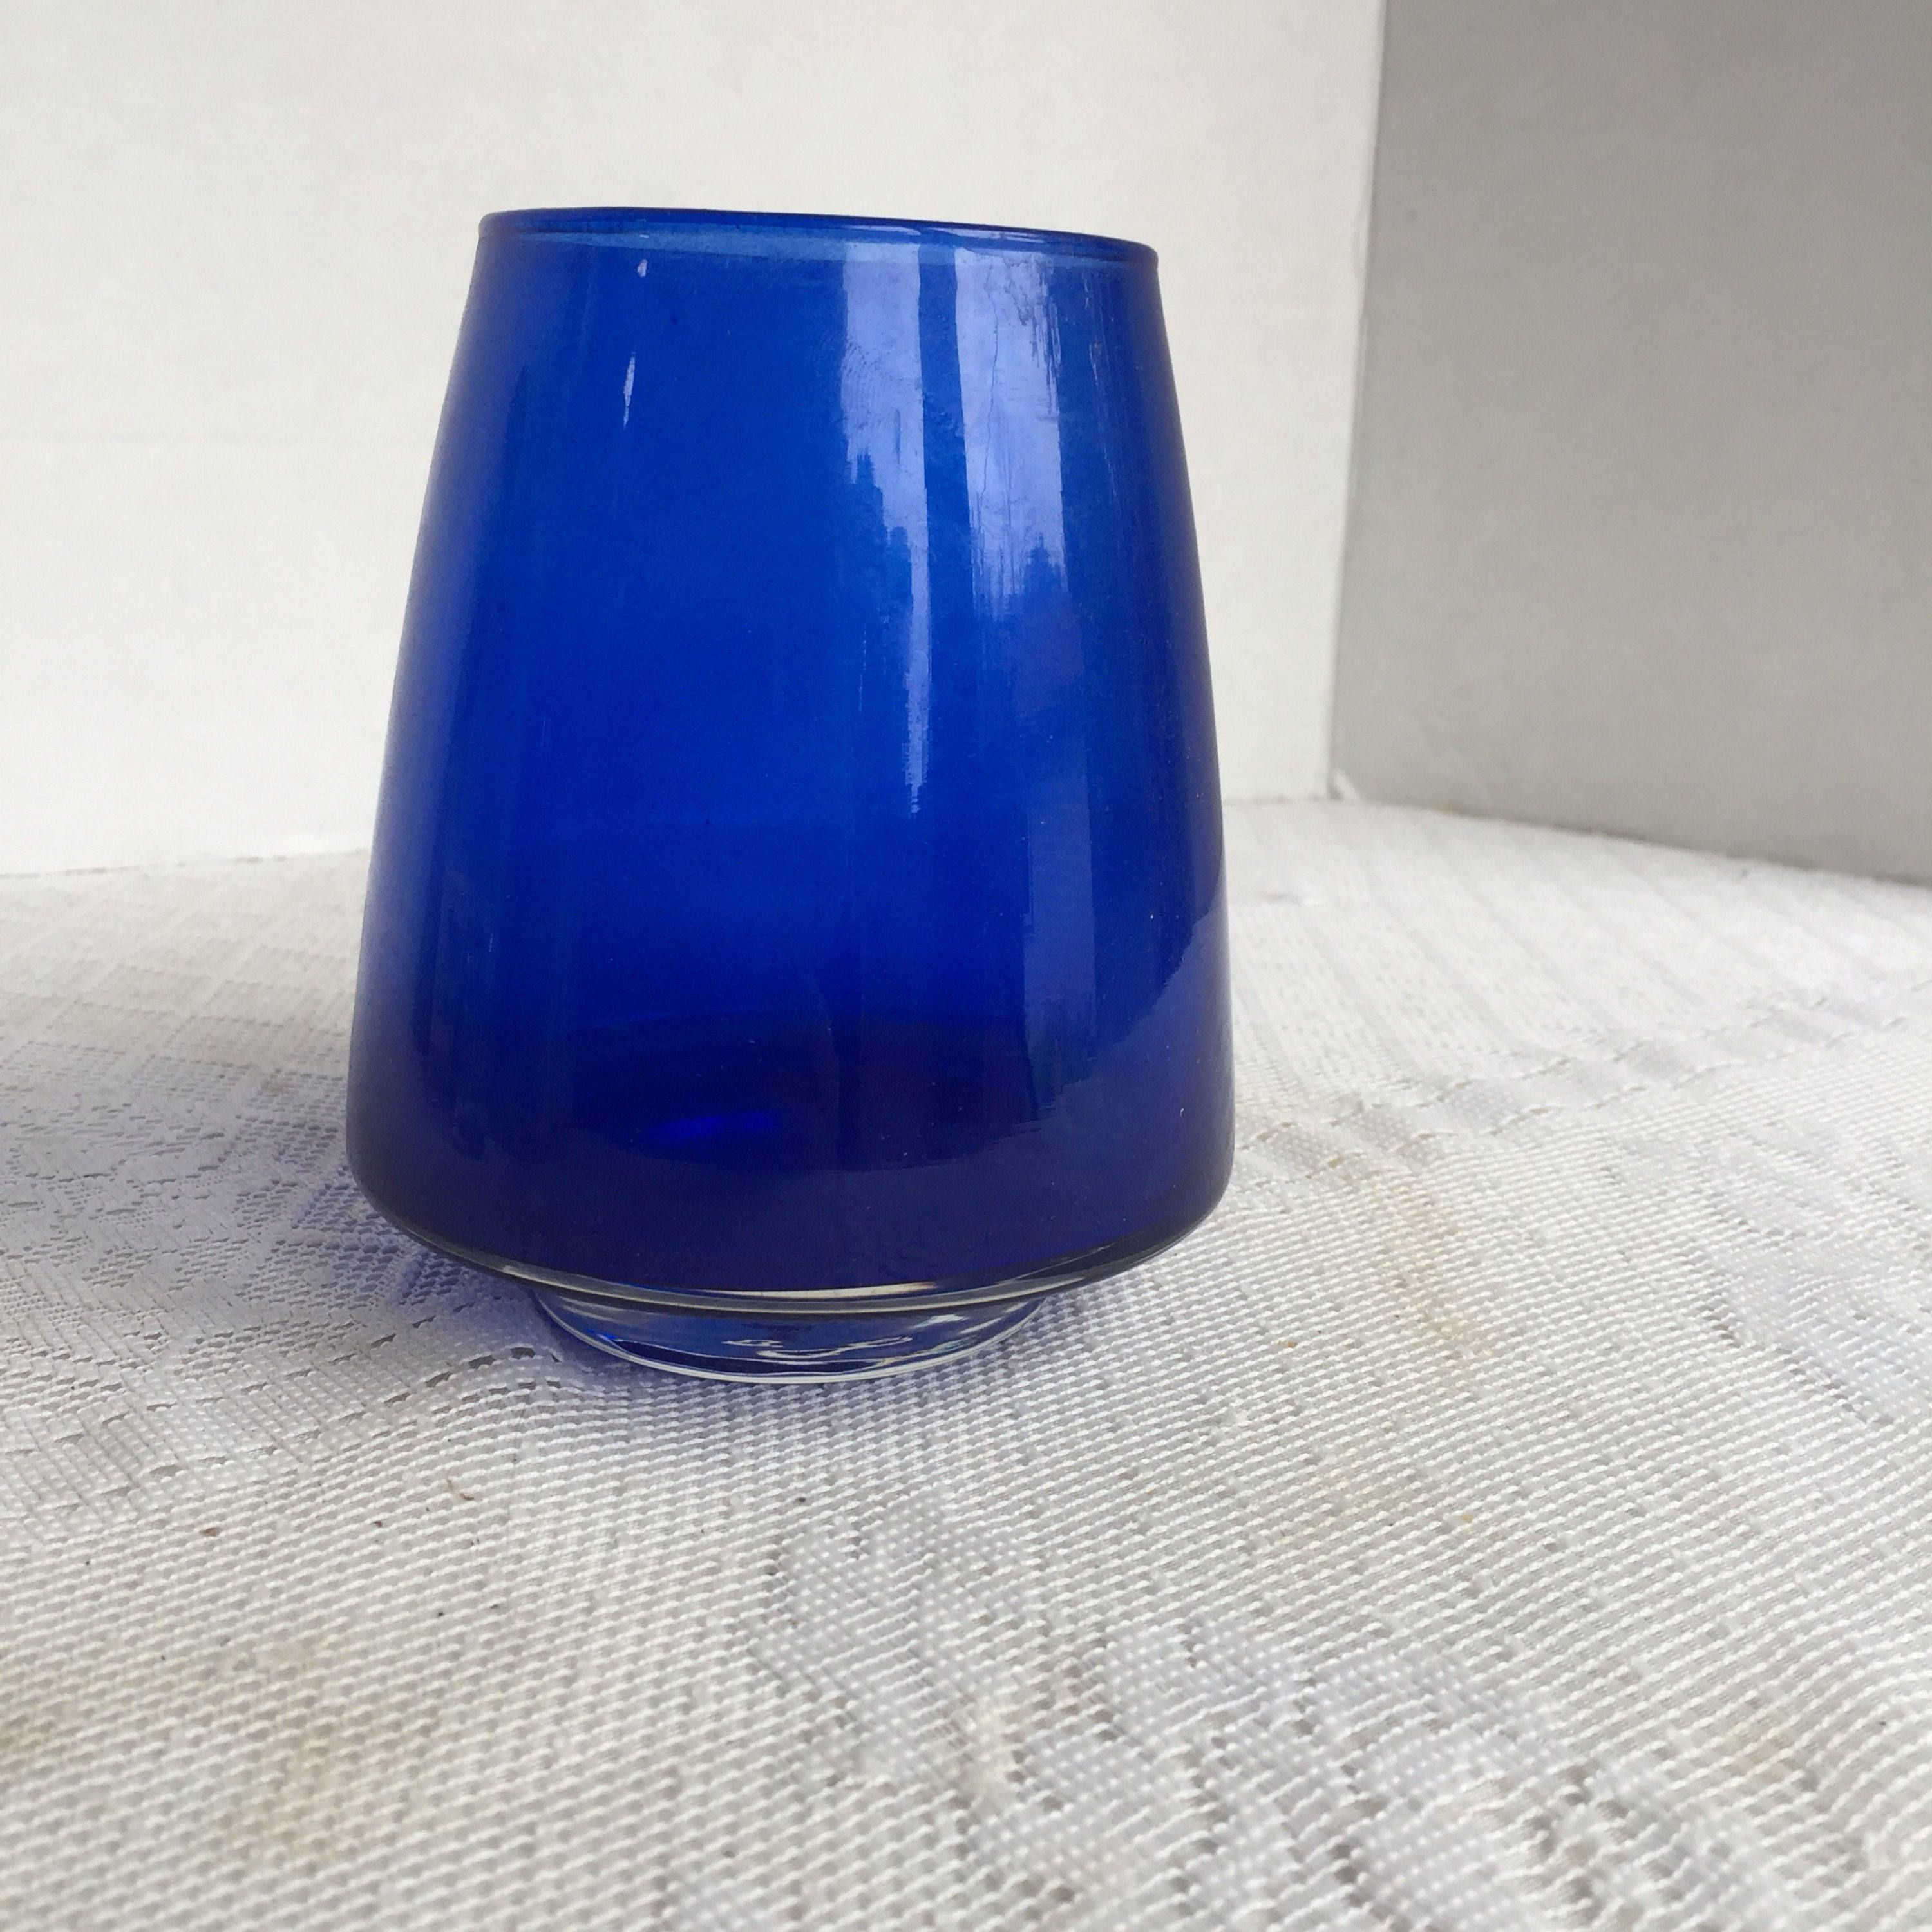 18 Spectacular Old Blue Glass Vases 2024 free download old blue glass vases of cobalt blue glass cone shaped vase vintage seventies floral throughout cobalt blue glass cone shaped vase vintage seventies floral supplies by vintagepoetic on etsy